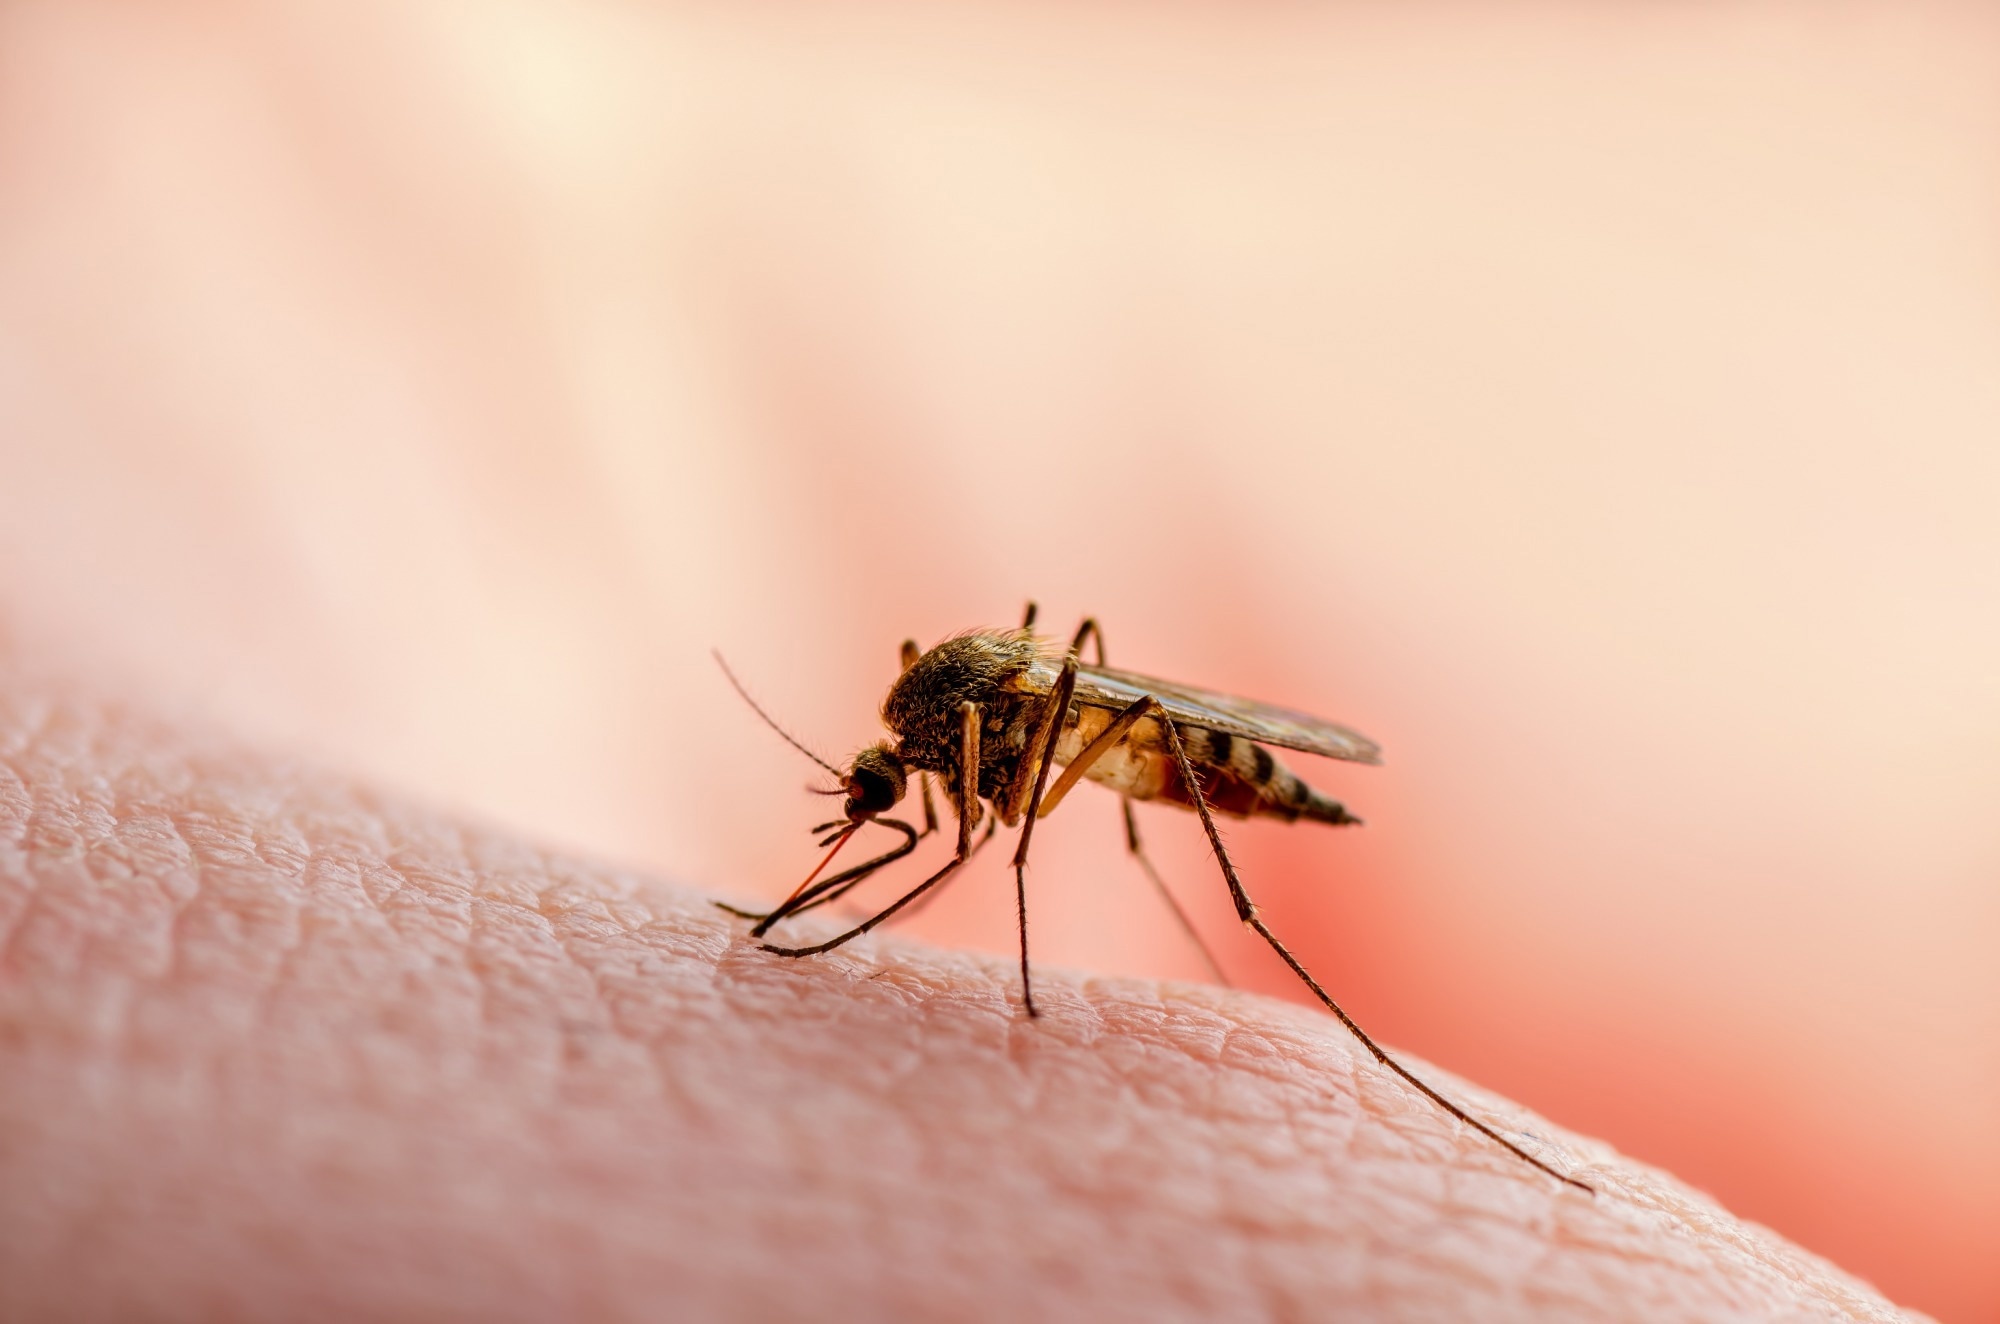 Study: Liver-targeted polymeric prodrugs delivered subcutaneously improve tafenoquine therapeutic window for malaria radical cure. Image Credit: nechaevkon/Shutterstock.com